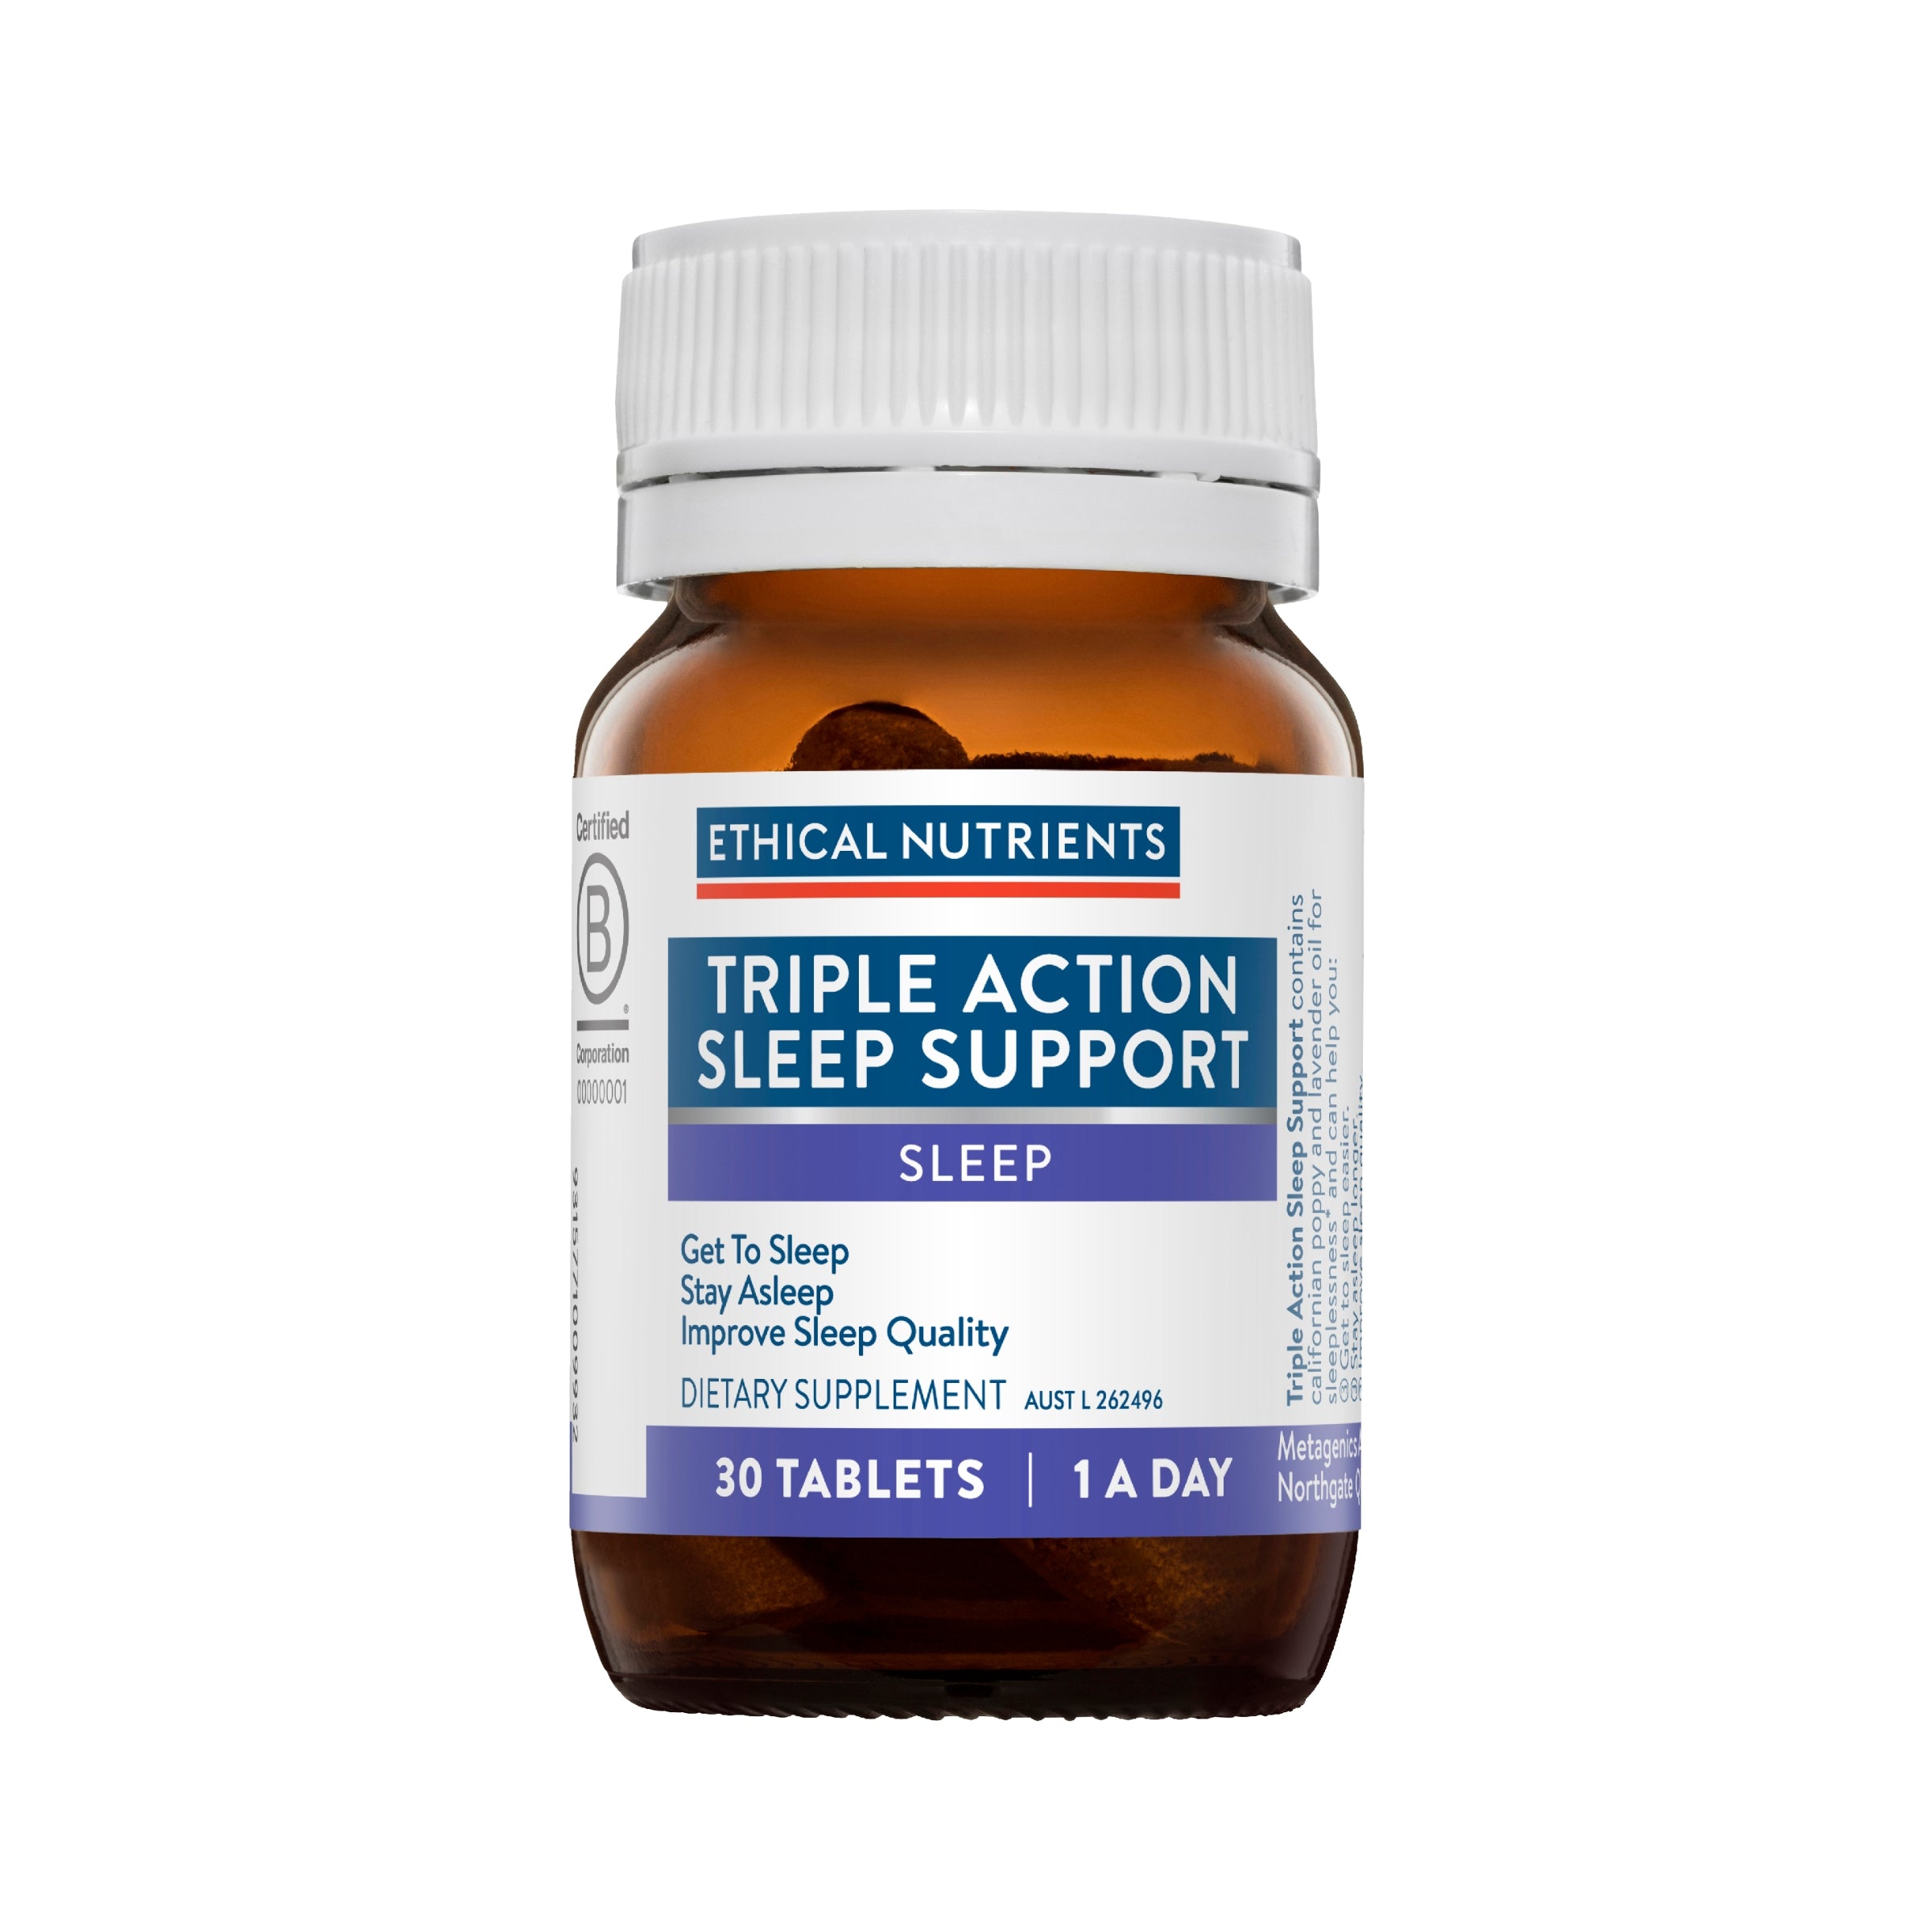 Ethical Nutrients Triple Action Sleep Support 30 Tablets #size_30 tablets